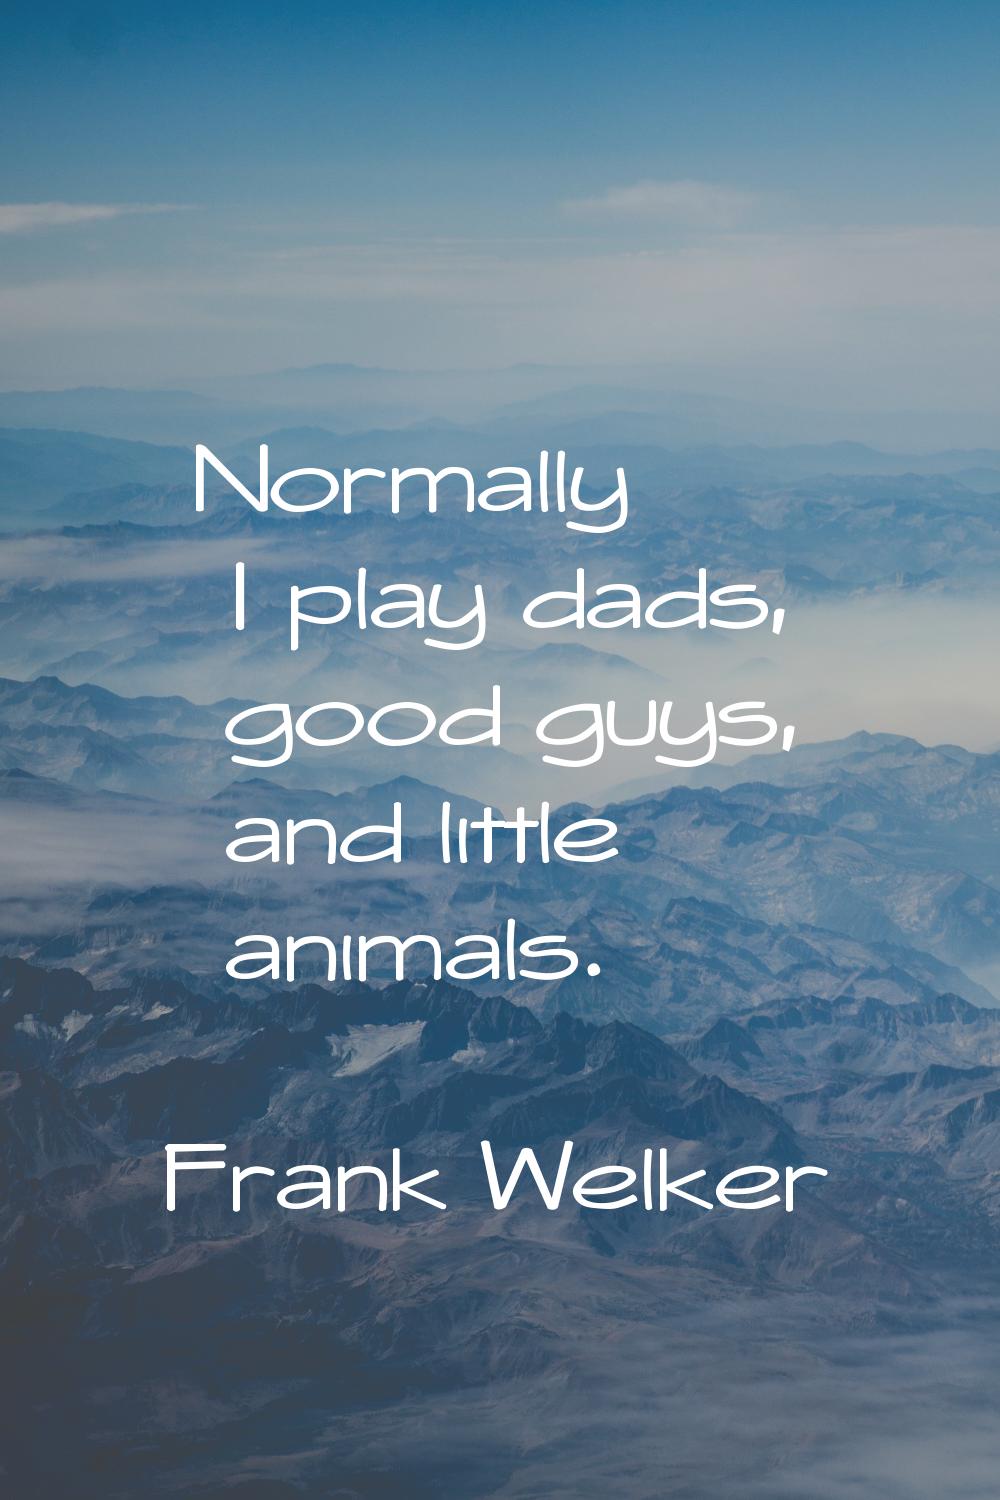 Normally I play dads, good guys, and little animals.